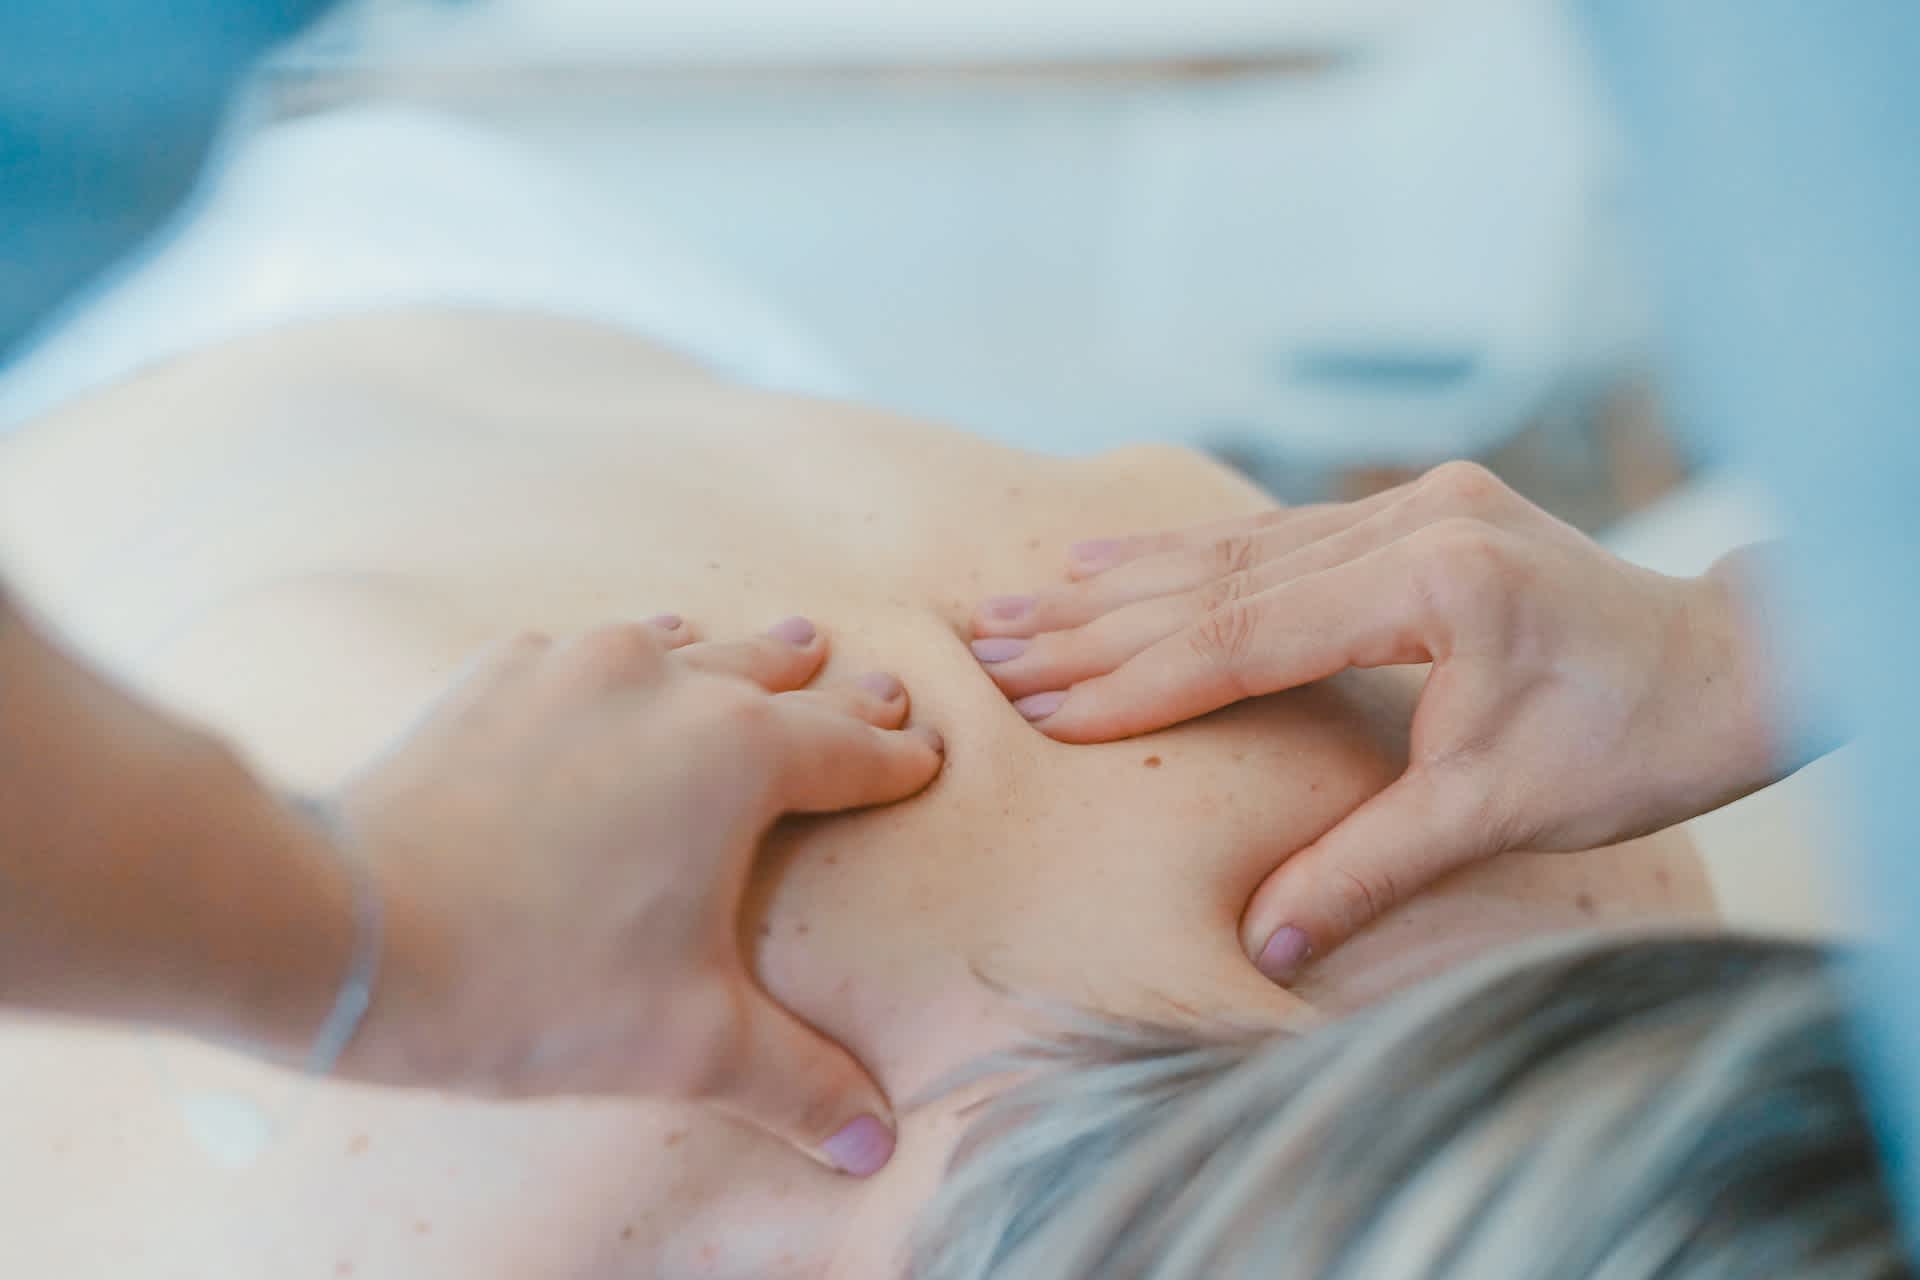 Massage therapist treating a patient's upper back